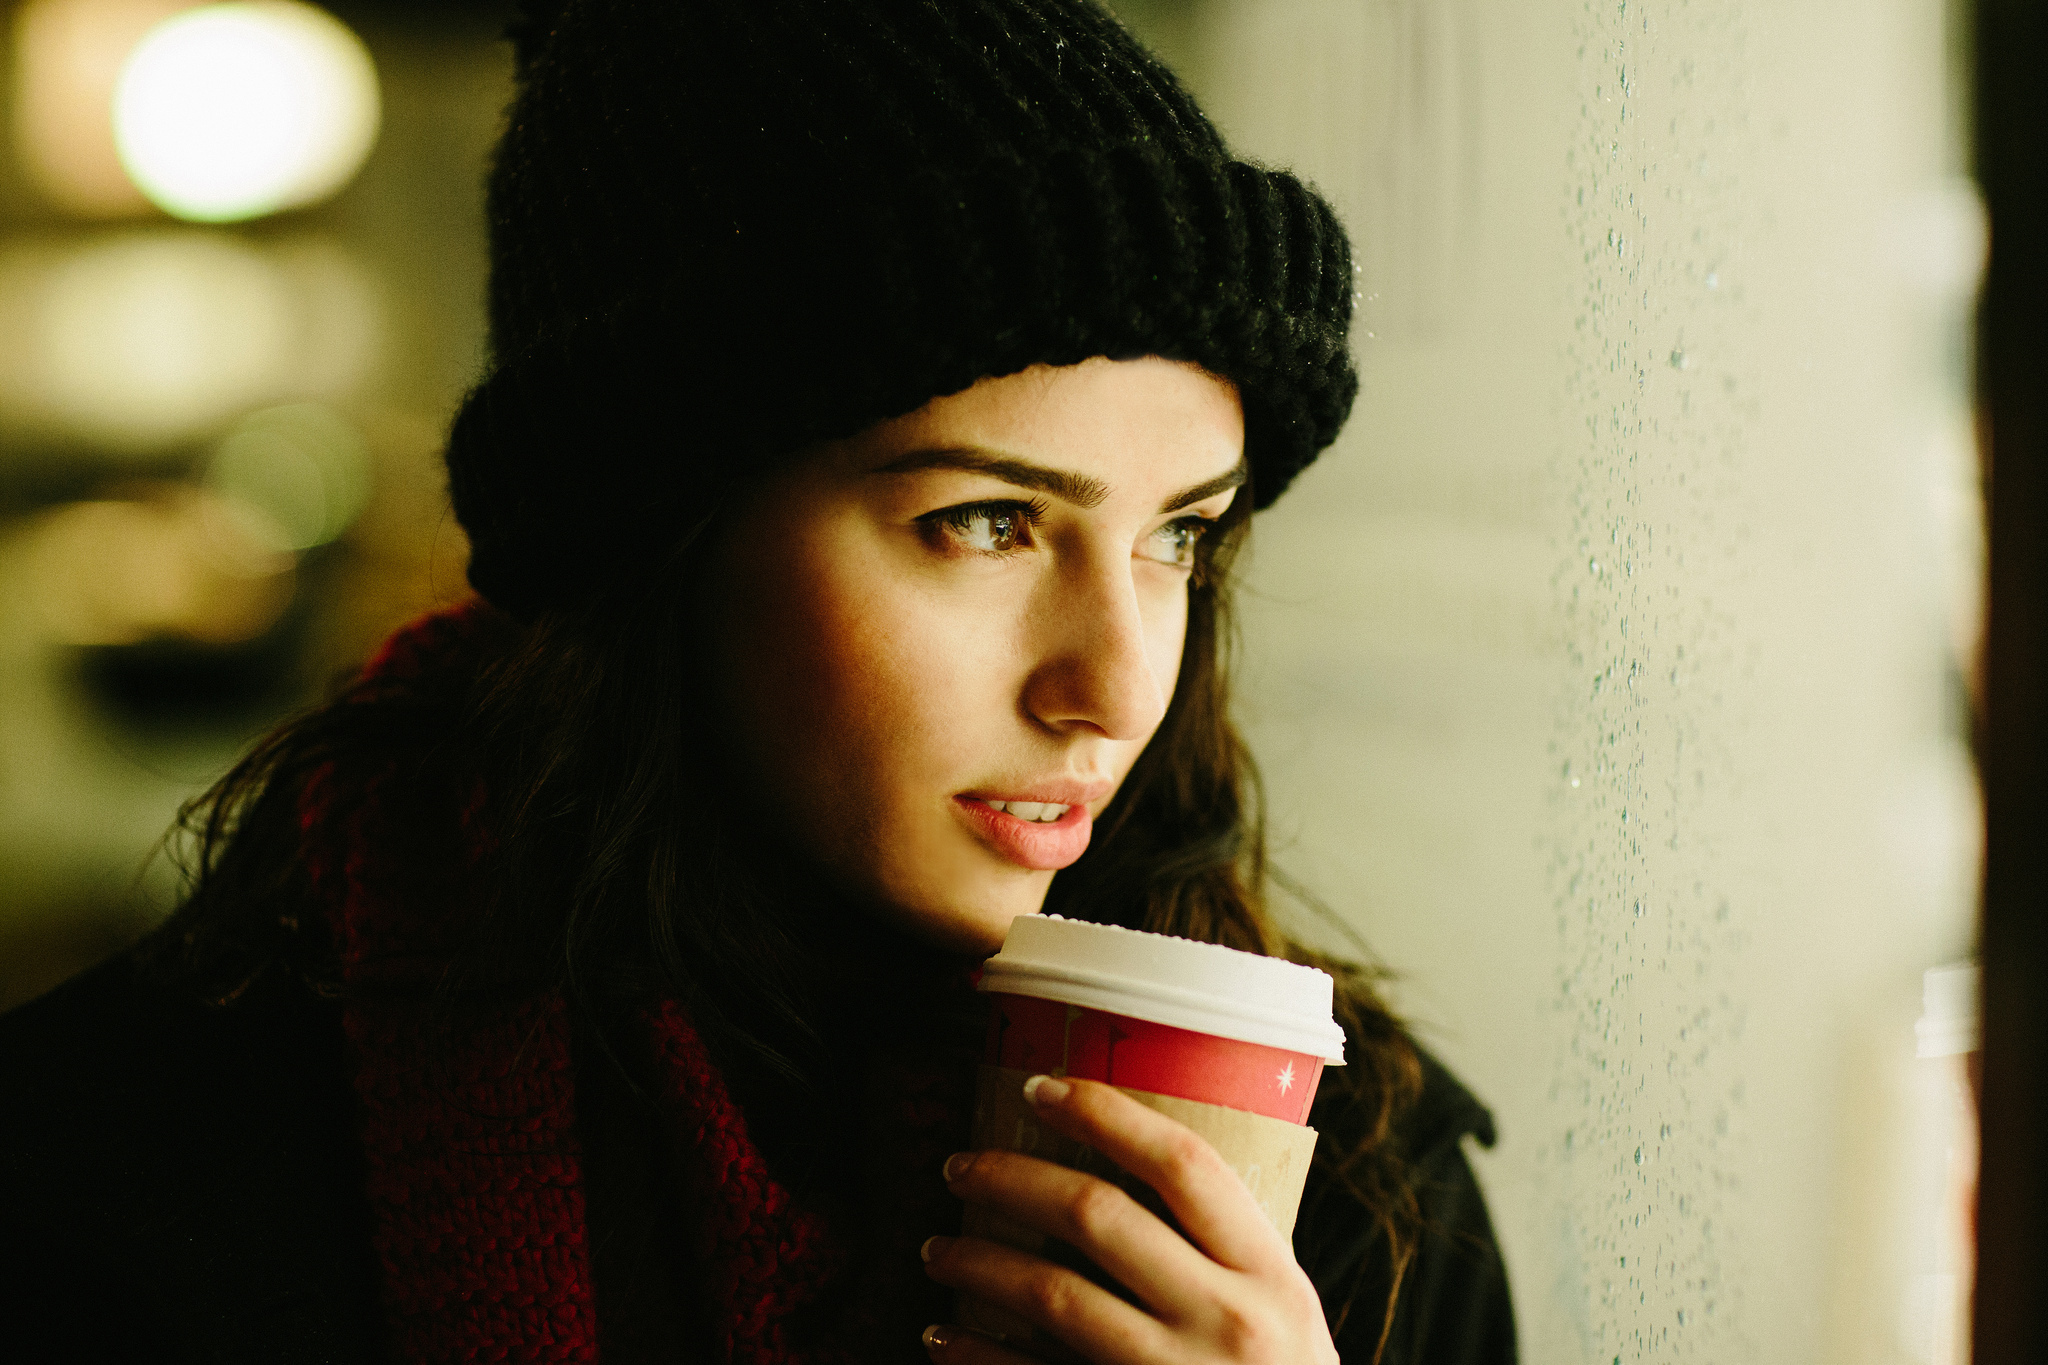 Girl Coffee Smile Cap Winter Drink Mood Face Wallpaper Background